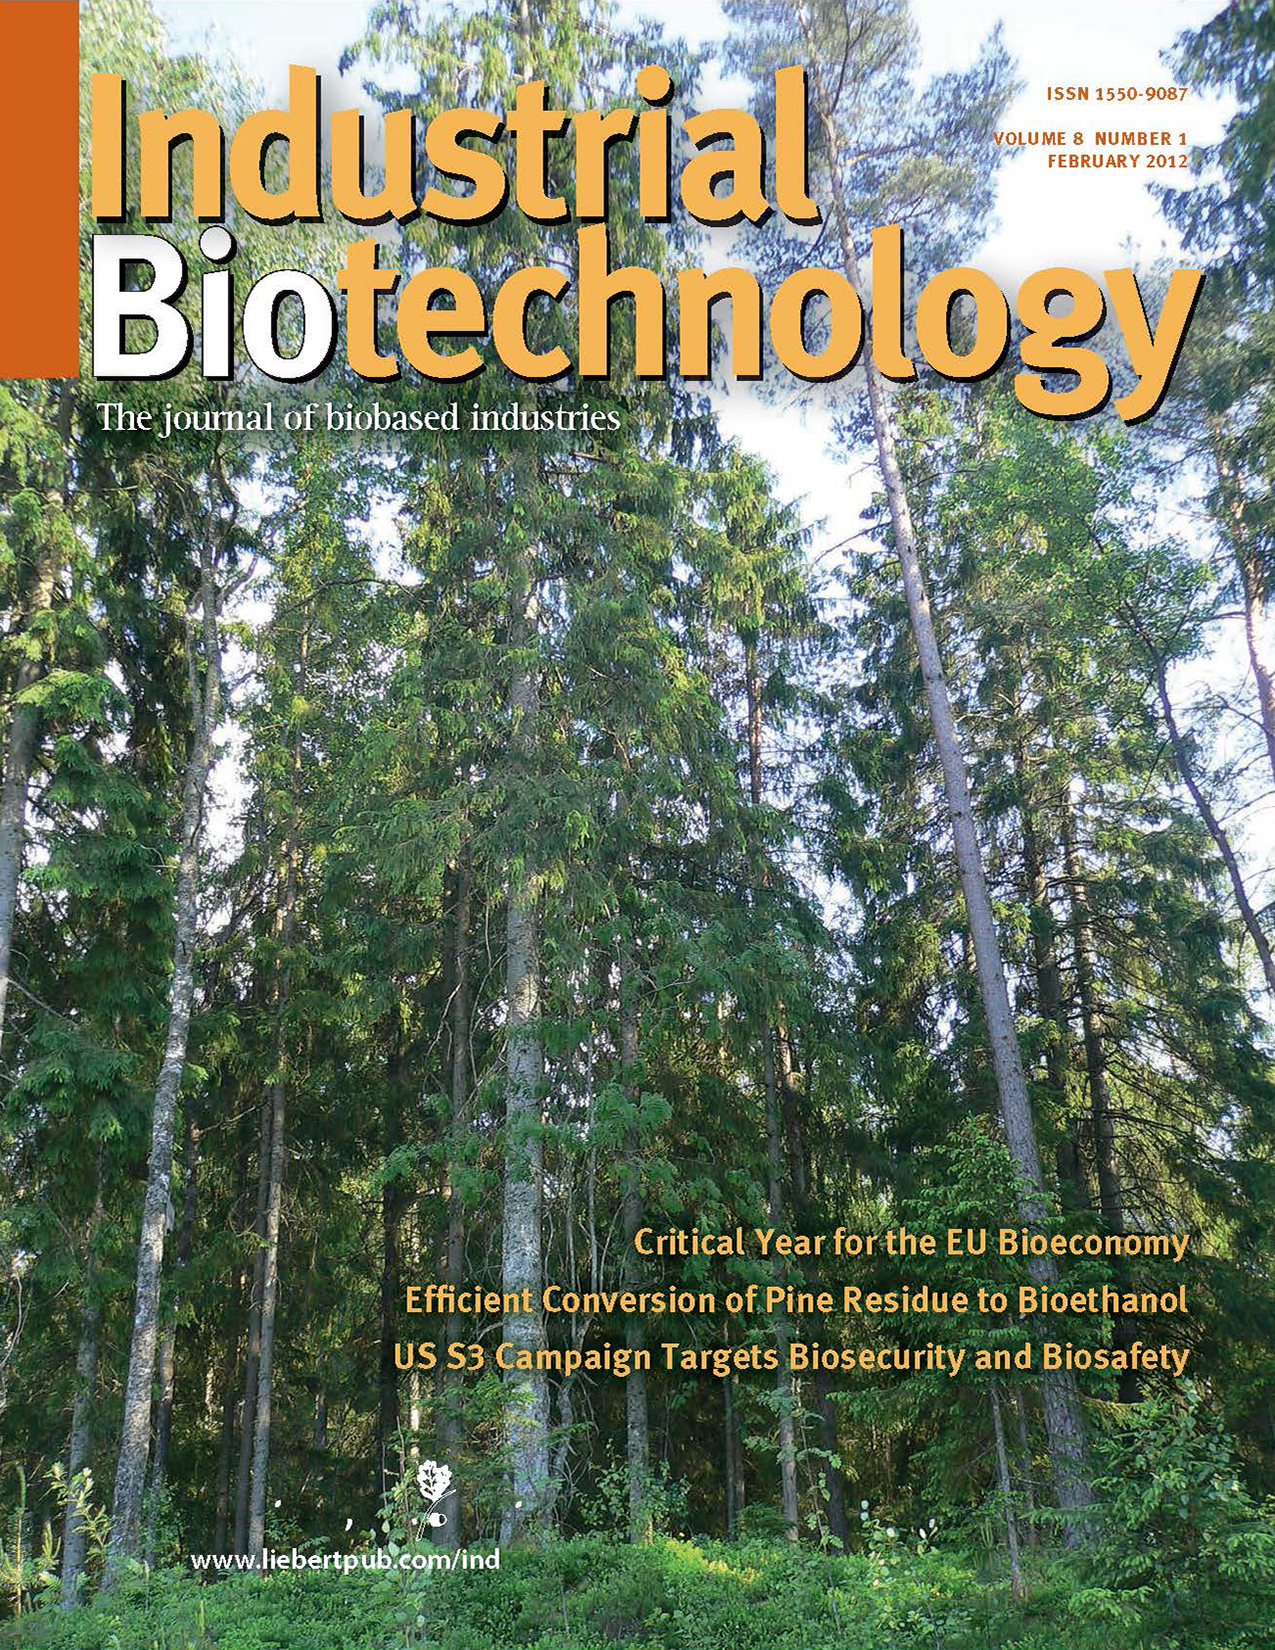 Industrial Biotechnology February 2012 cover.